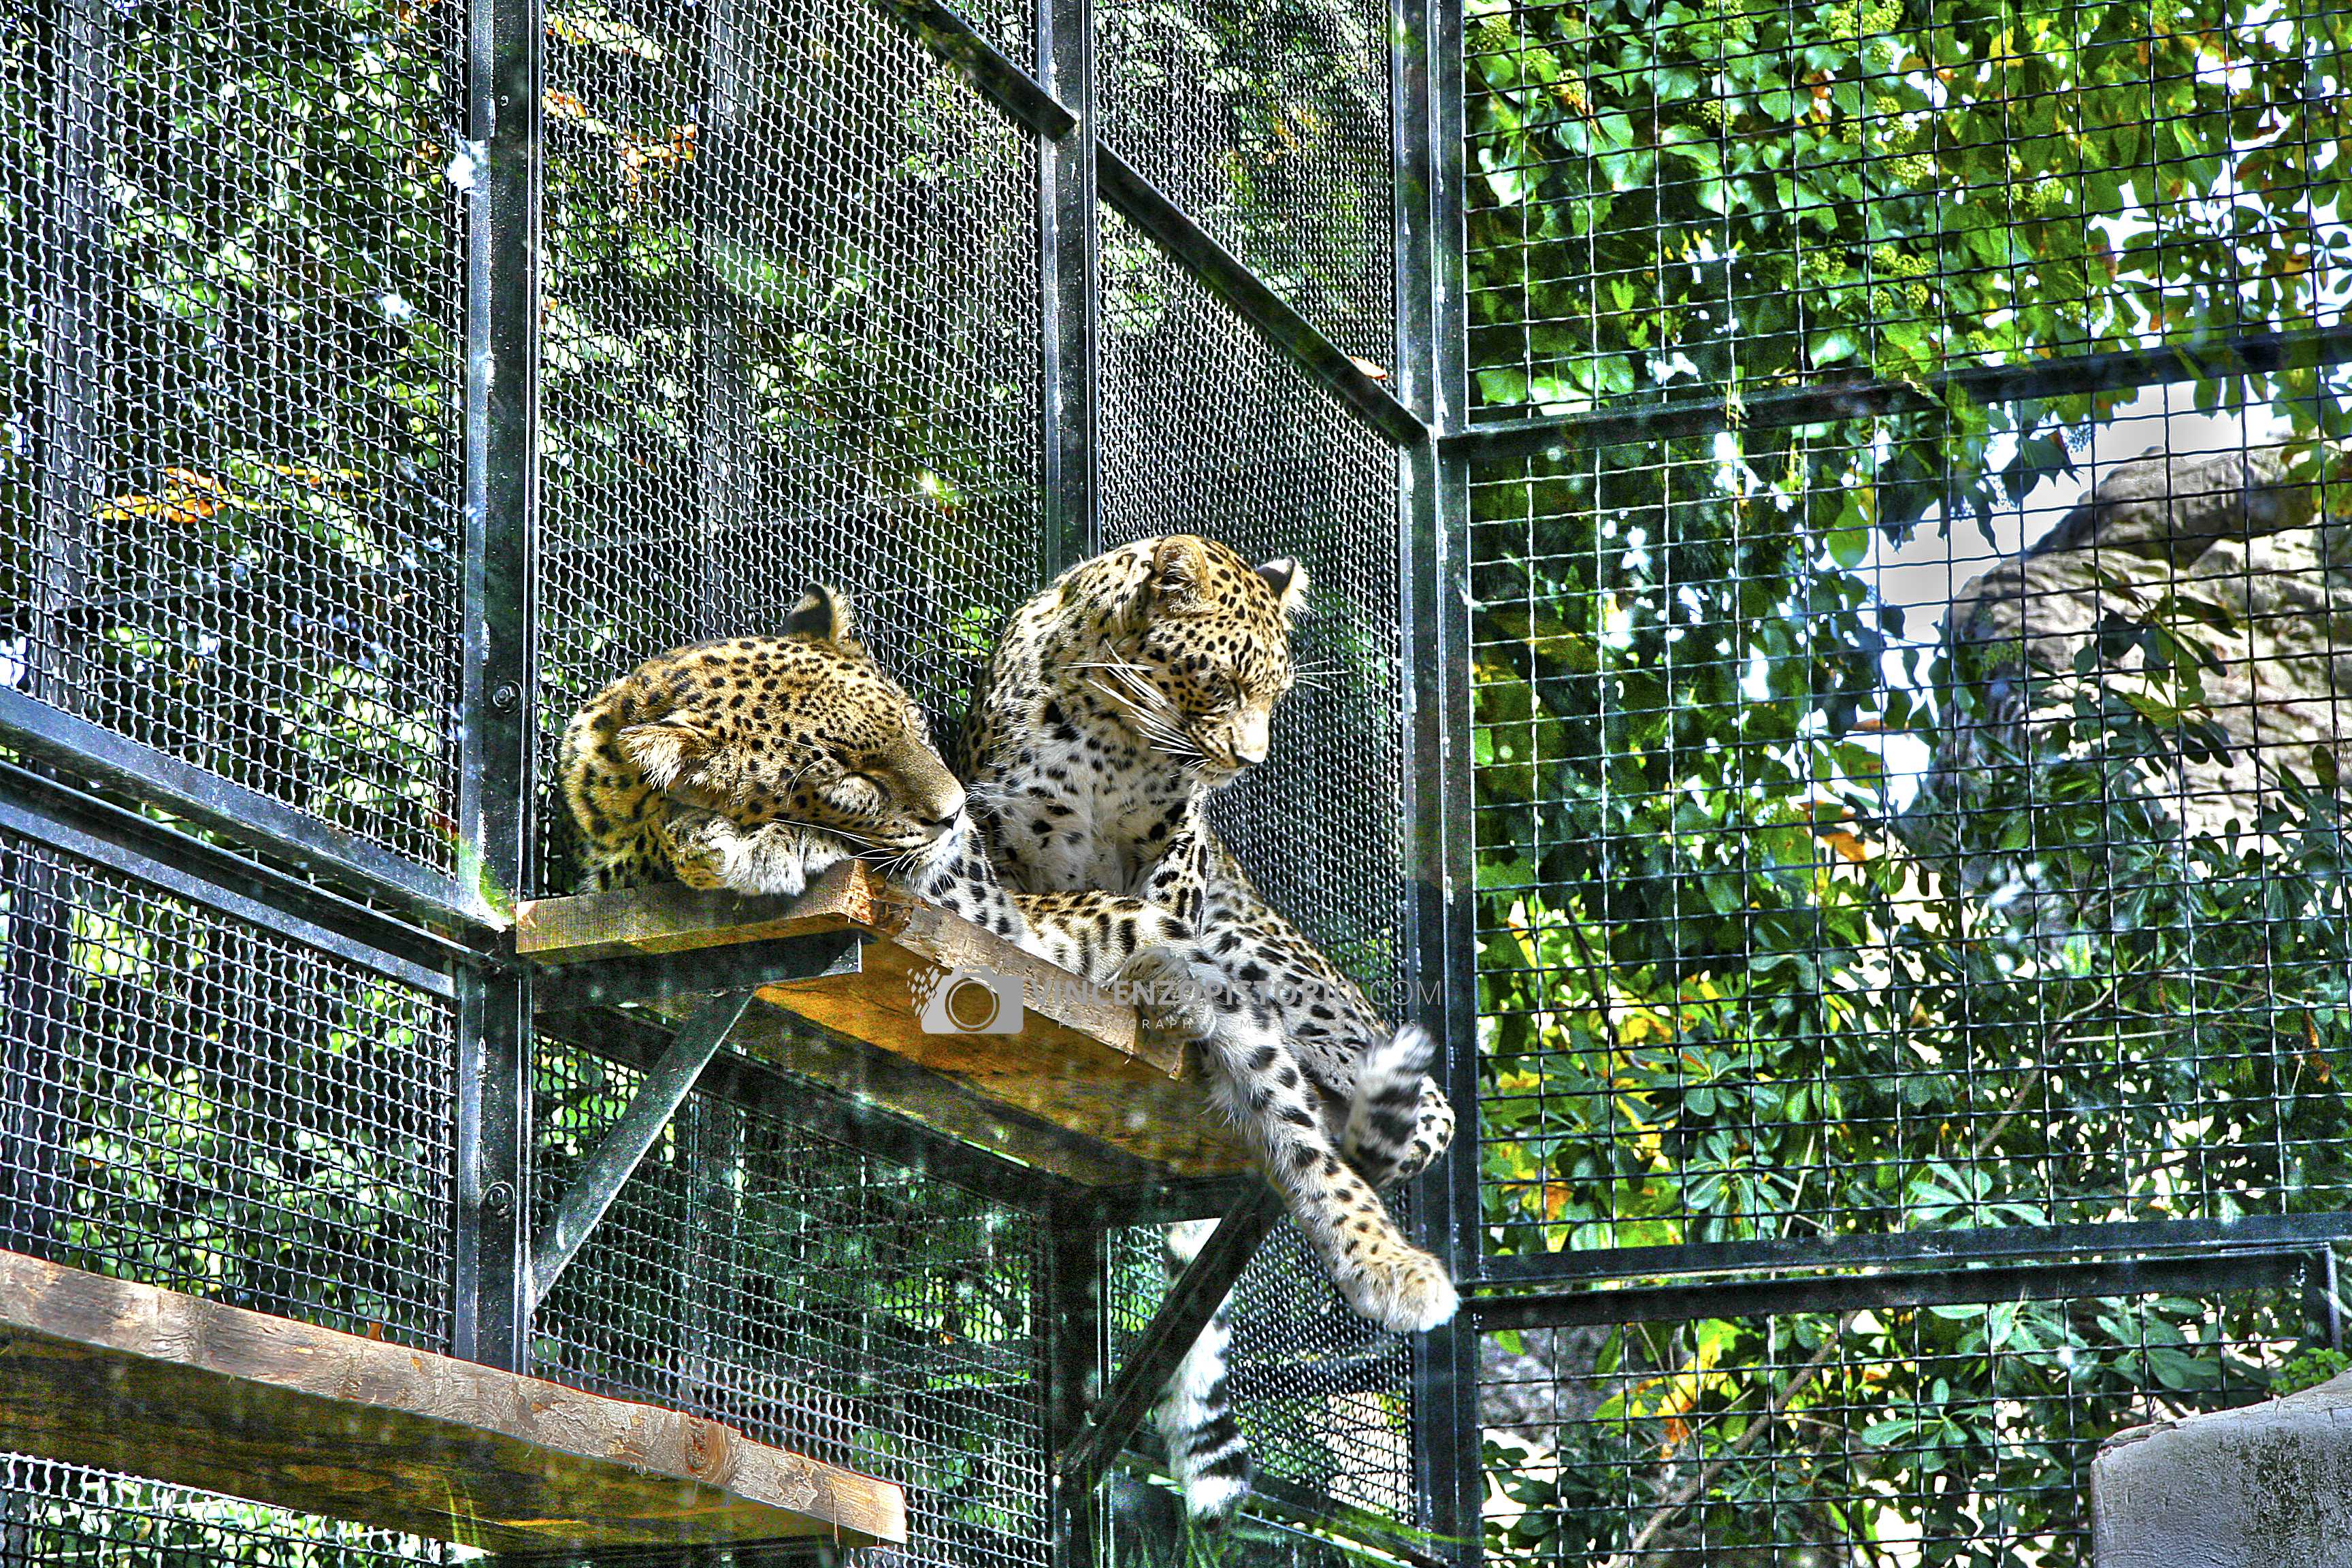 Leopards at Bioparco – HDR